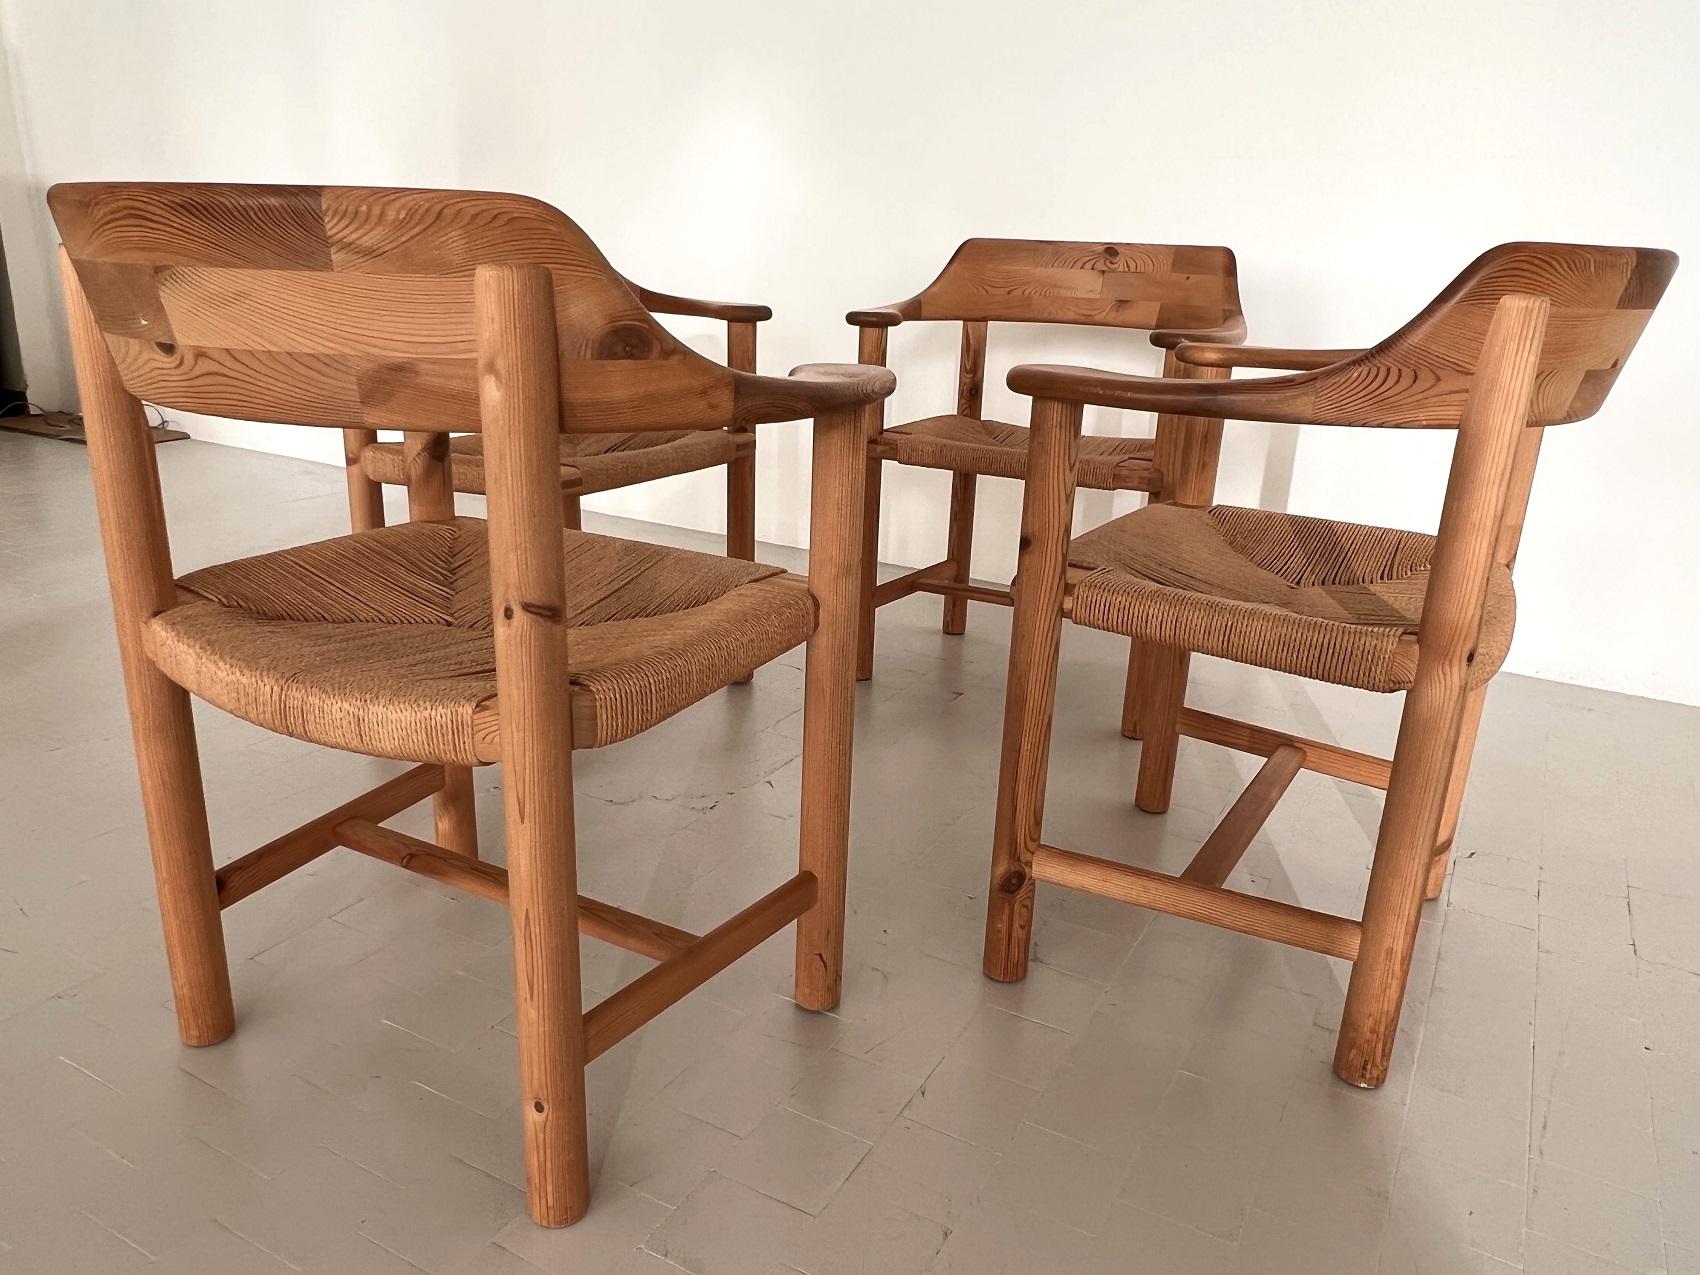 Rainer Daumiller Dining Chairs in Pine and Paper Cord, 1970s For Sale 6